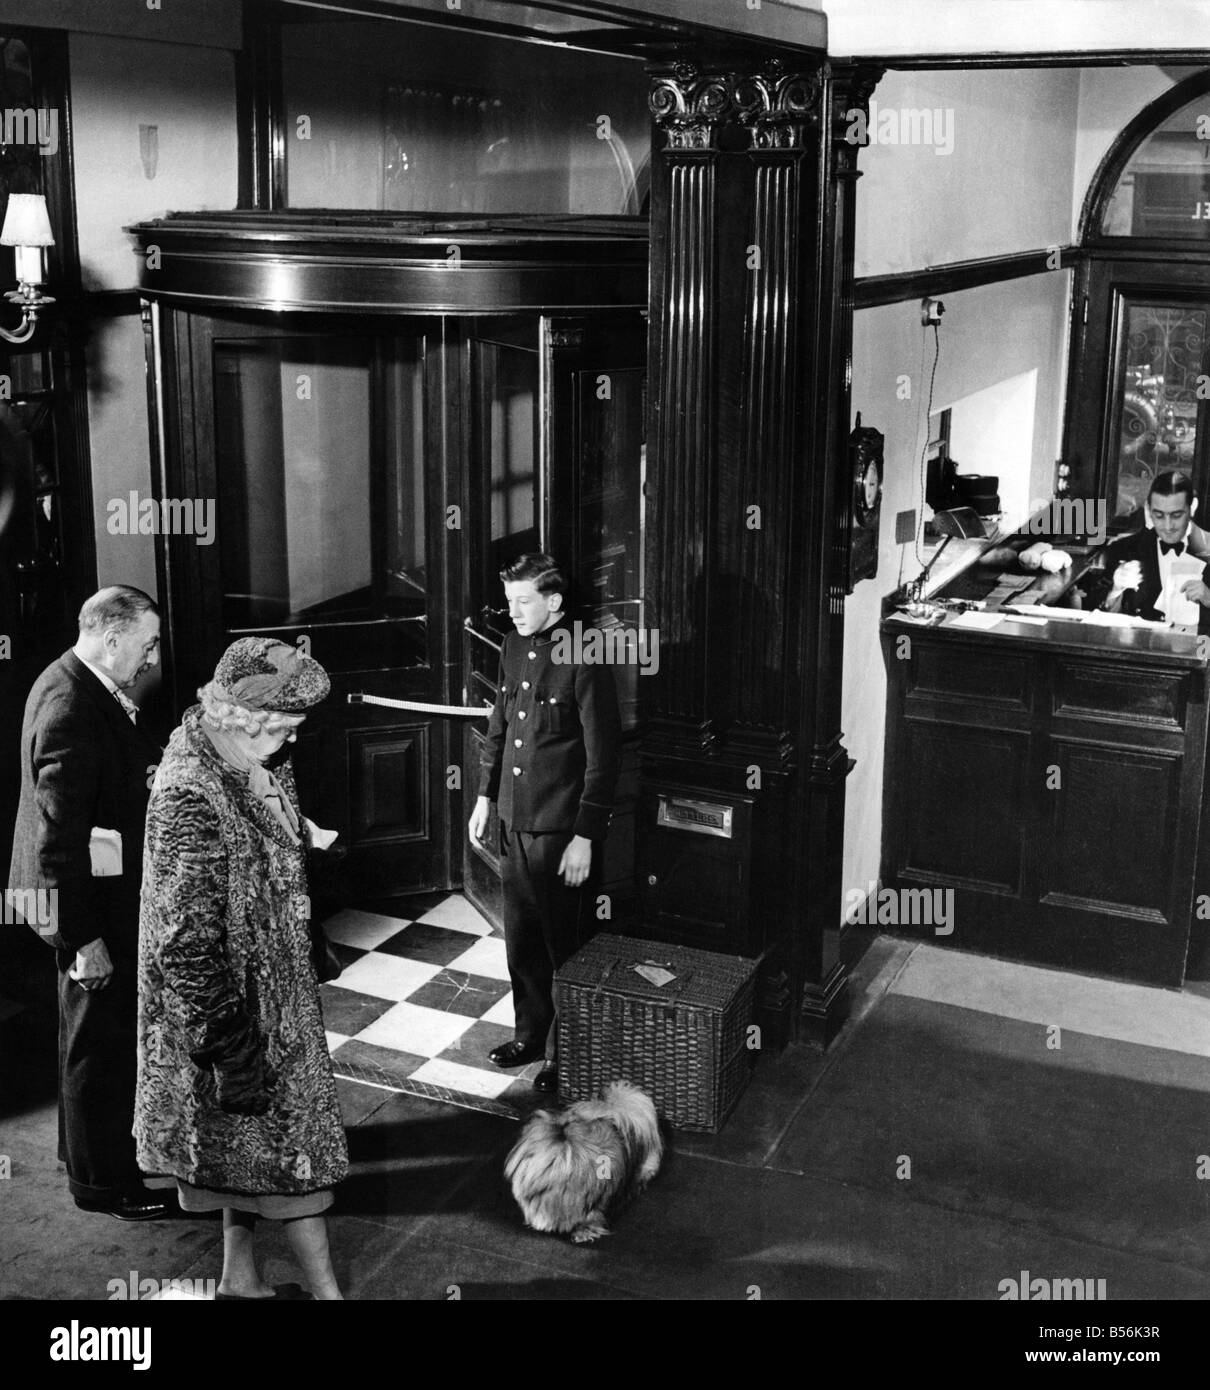 A typical lobby scene - the elderly lady and the Peke. The page's duty is to 'give it a run' first thing every morning. P009169 Stock Photo